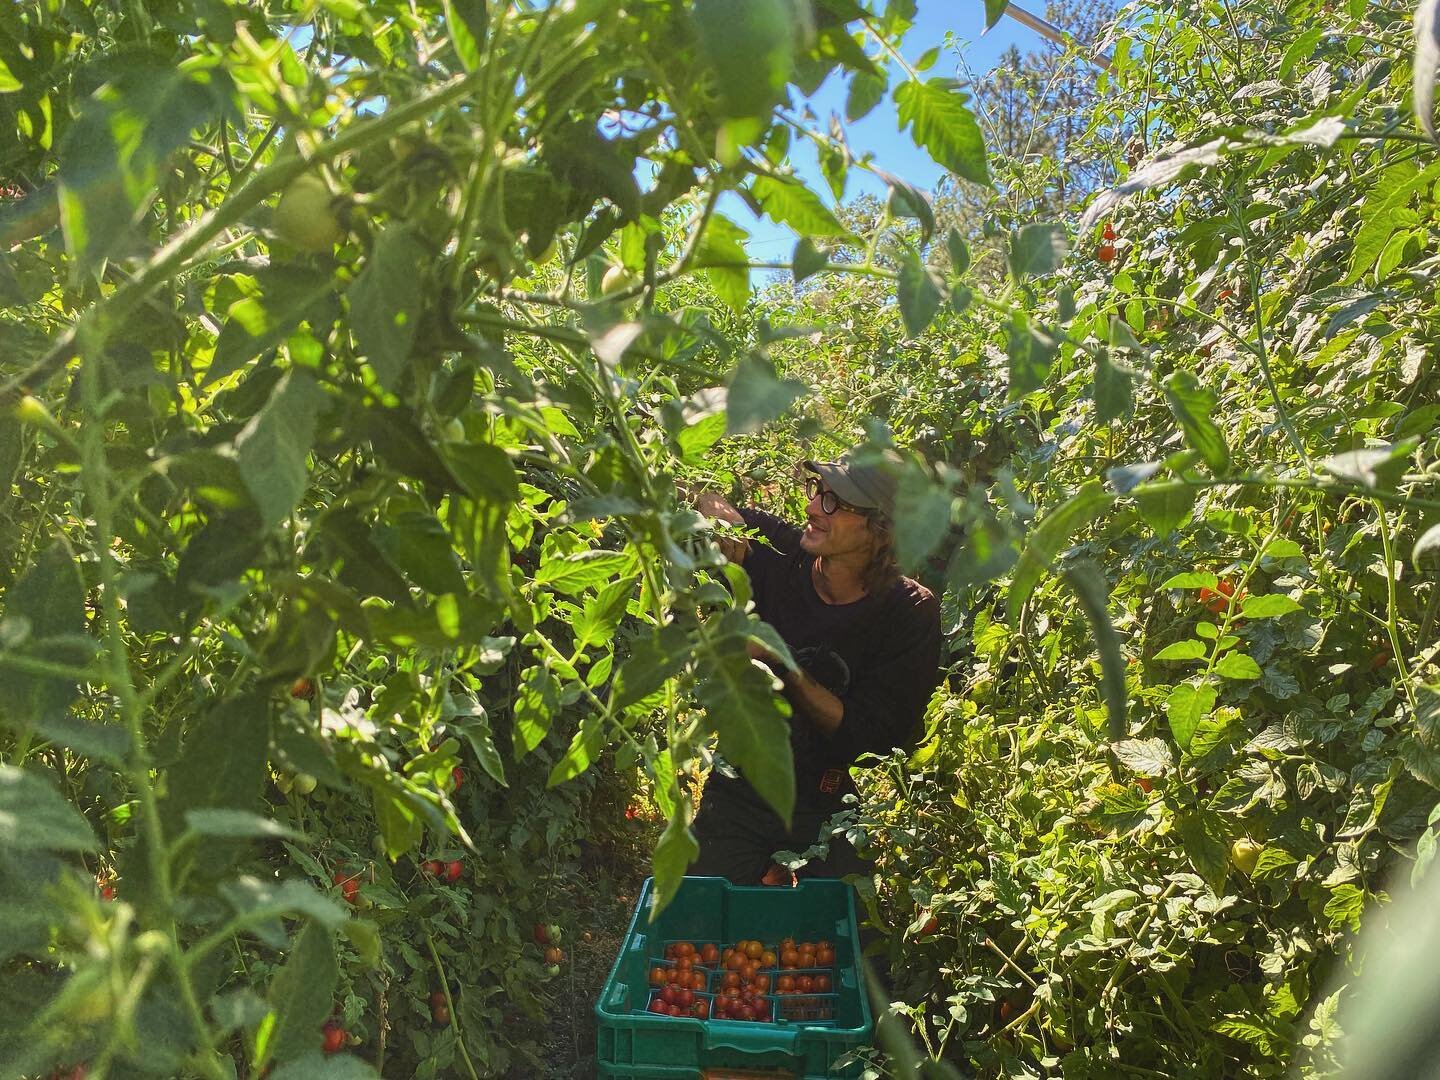 Getting lost in the tomato secret garden this week.